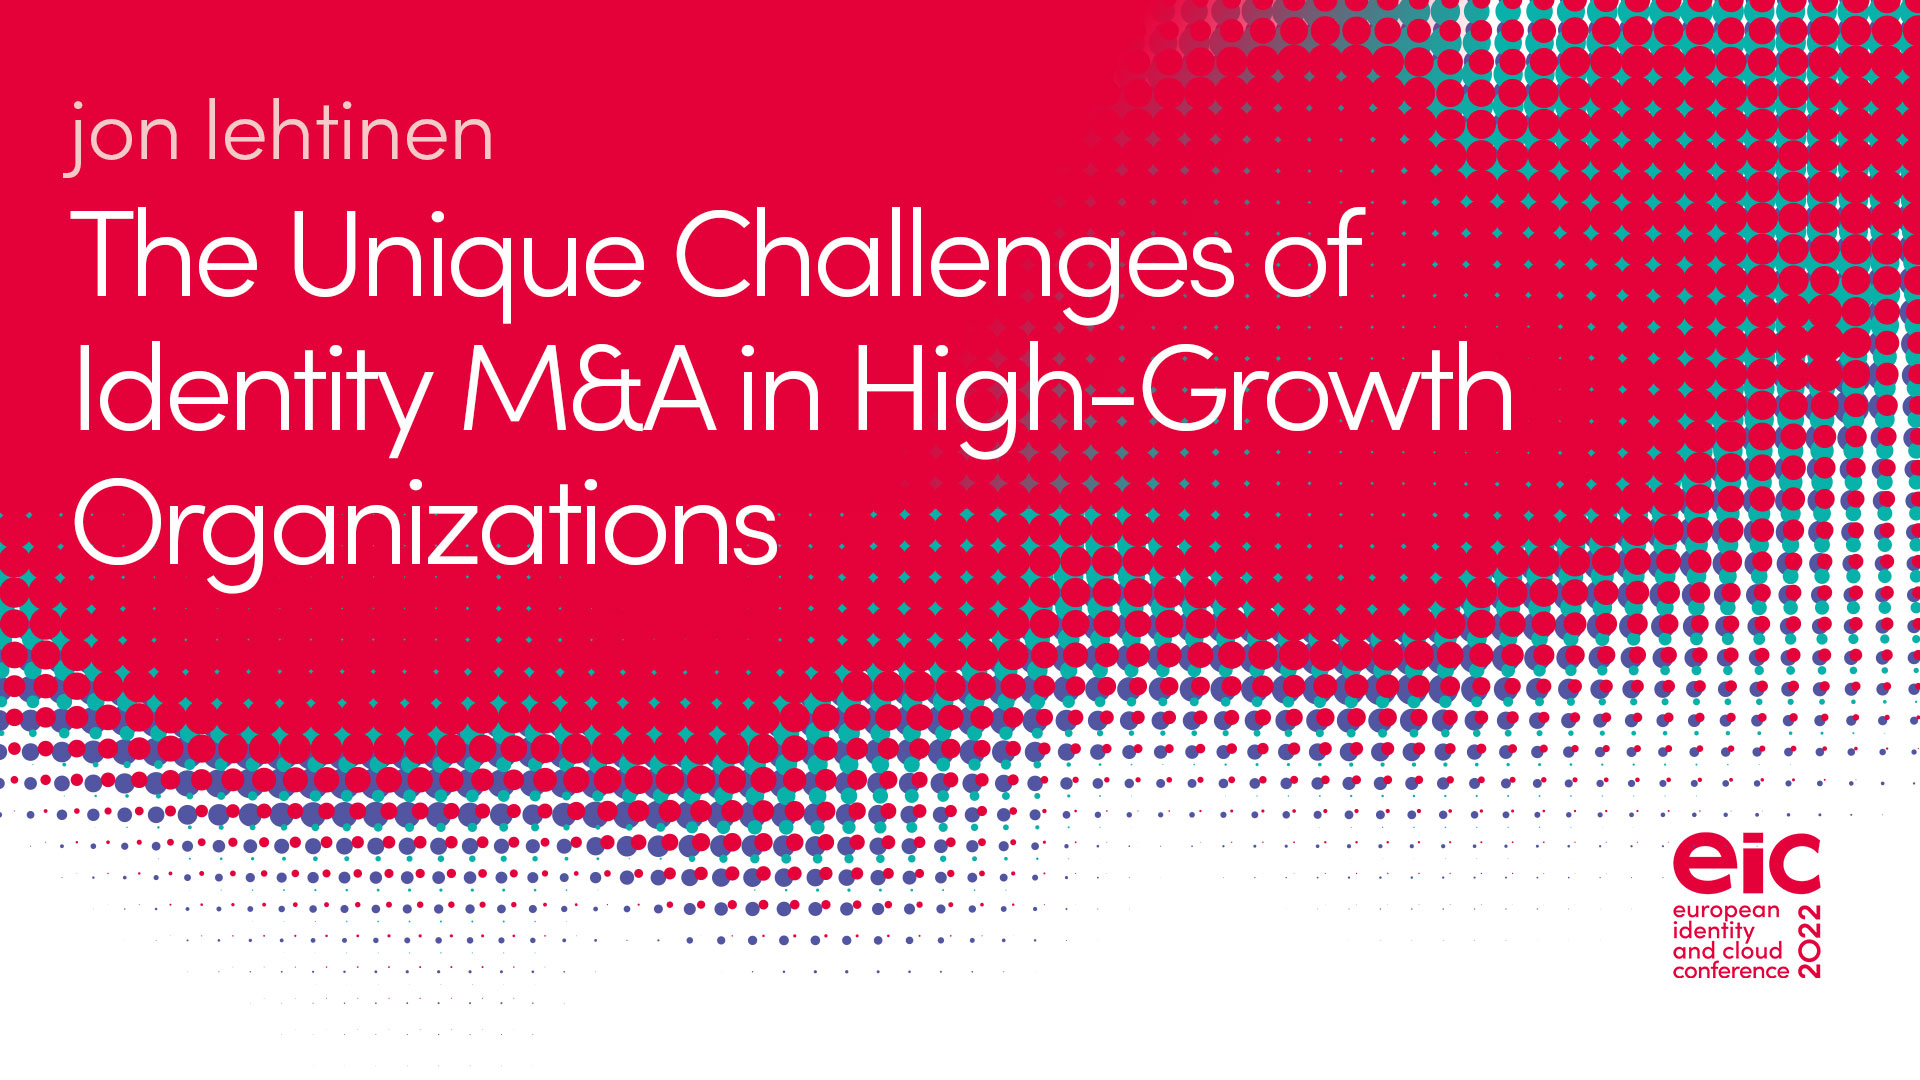 The Unique Challenges of Identity M&A in High-Growth Organizations